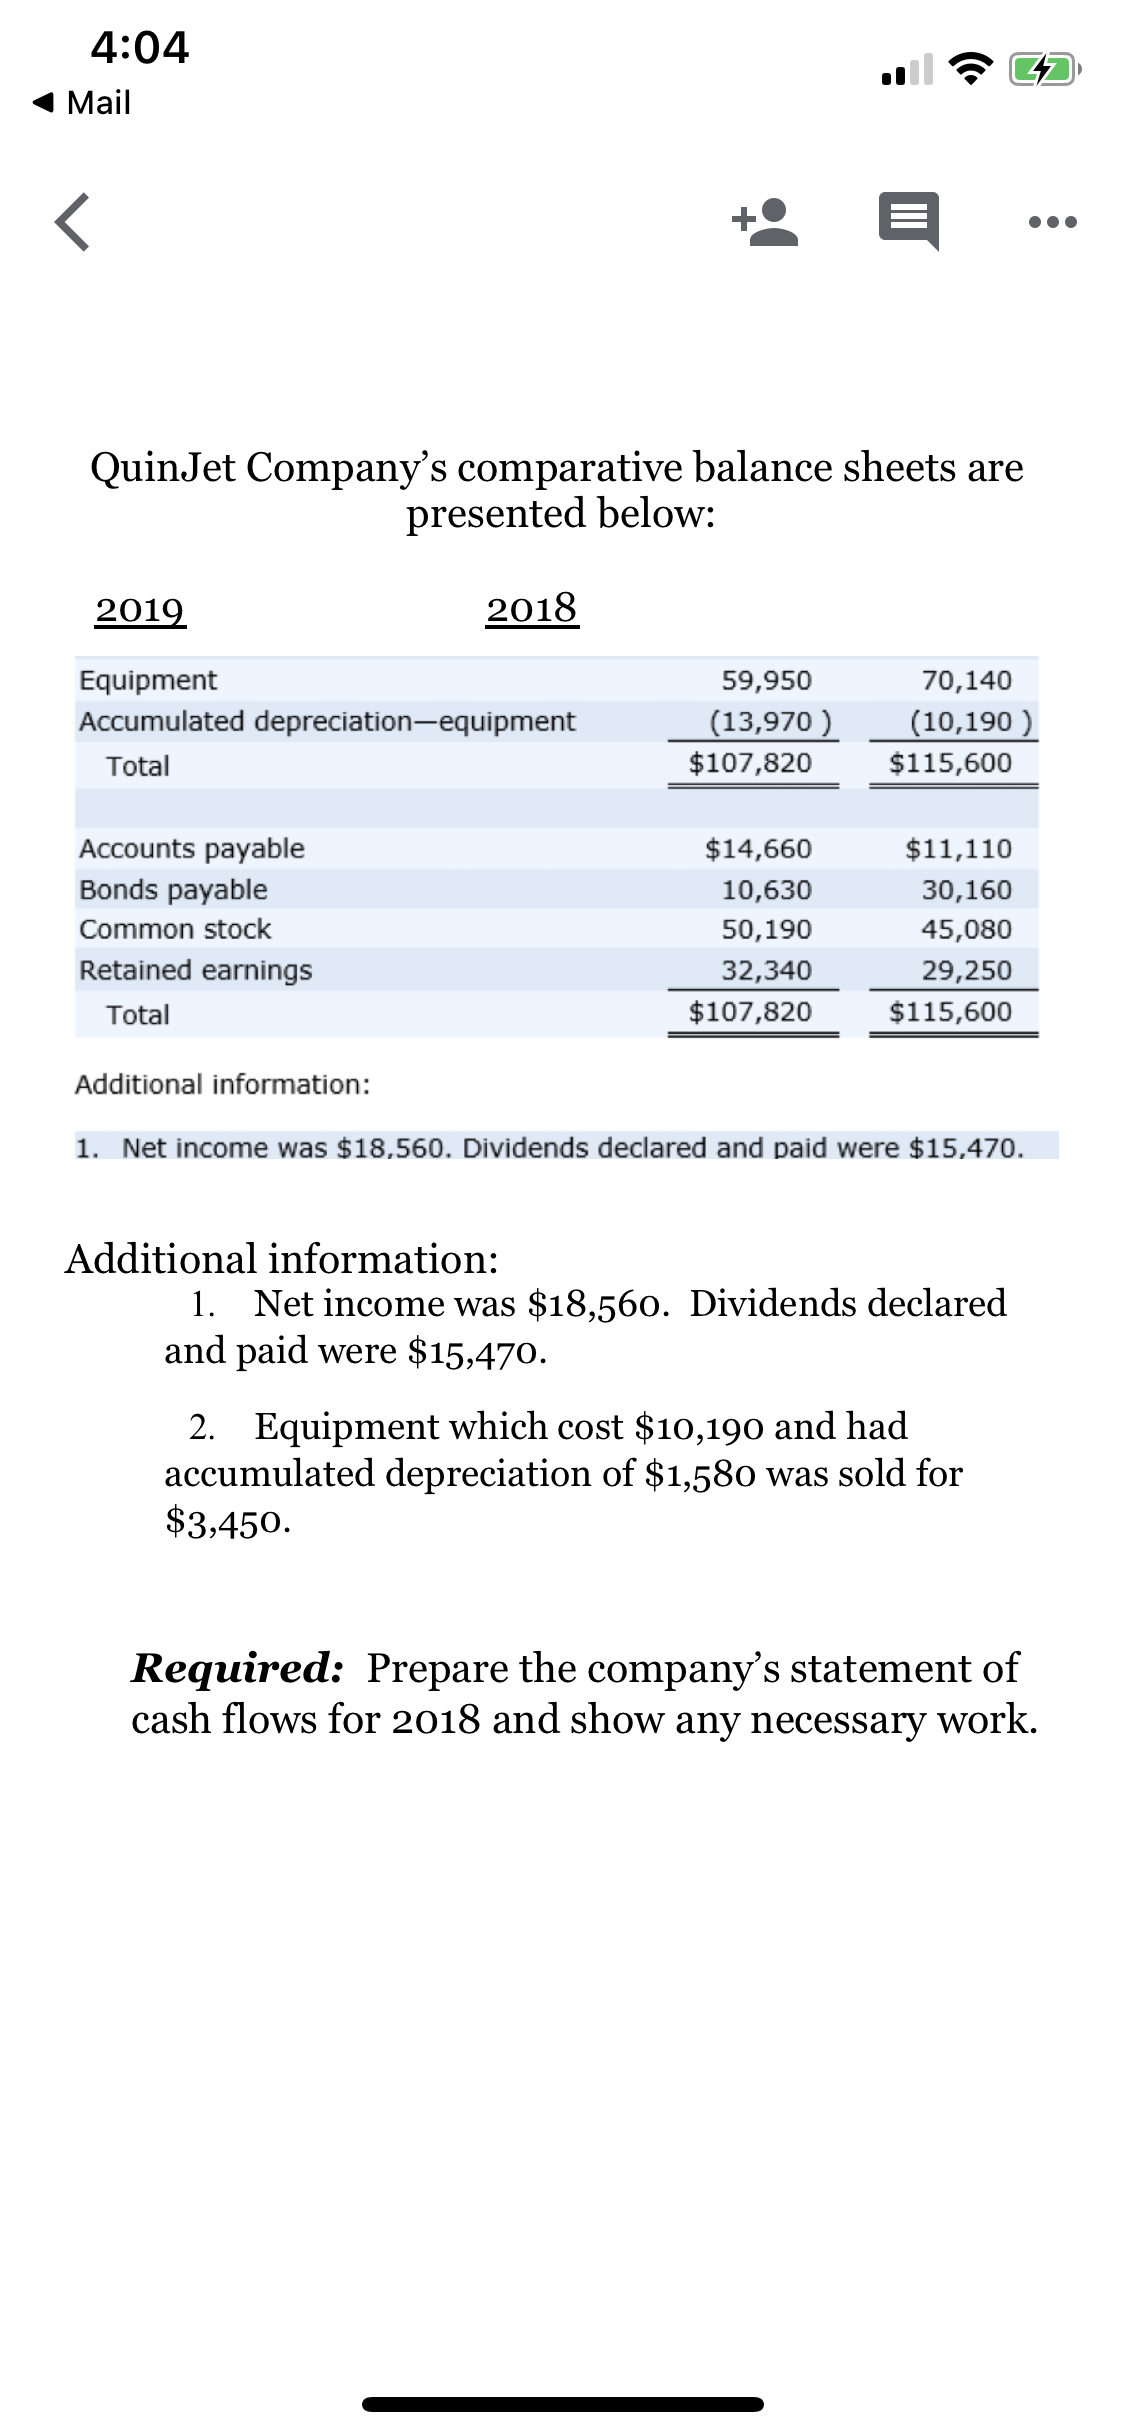 QuinJet Company's comparative balance sheets are
presented below:
2019
2018
Equipment
59,950
70,140
(13,970 )
$107,820
Accumulated depreciation-equipment
(10,190 )
Total
$115,600
Accounts payable
Bonds payable
$14,660
$11,110
10,630
30,160
Common stock
50,190
45,080
Retained earnings
32,340
29,250
Total
$107,820
$115,600
Additional information:
1. Net income was $18,560. Dividends declared and paid were $15,470.
Additional information:
1. Net income was $18,560. Dividends declared
and paid were $15,470.
2. Equipment which cost $10,190 and had
accumulated depreciation of $1,580 was sold for
$3,450.
Required: Prepare the company's statement of
cash flows for 2018 and show any necessary work.
